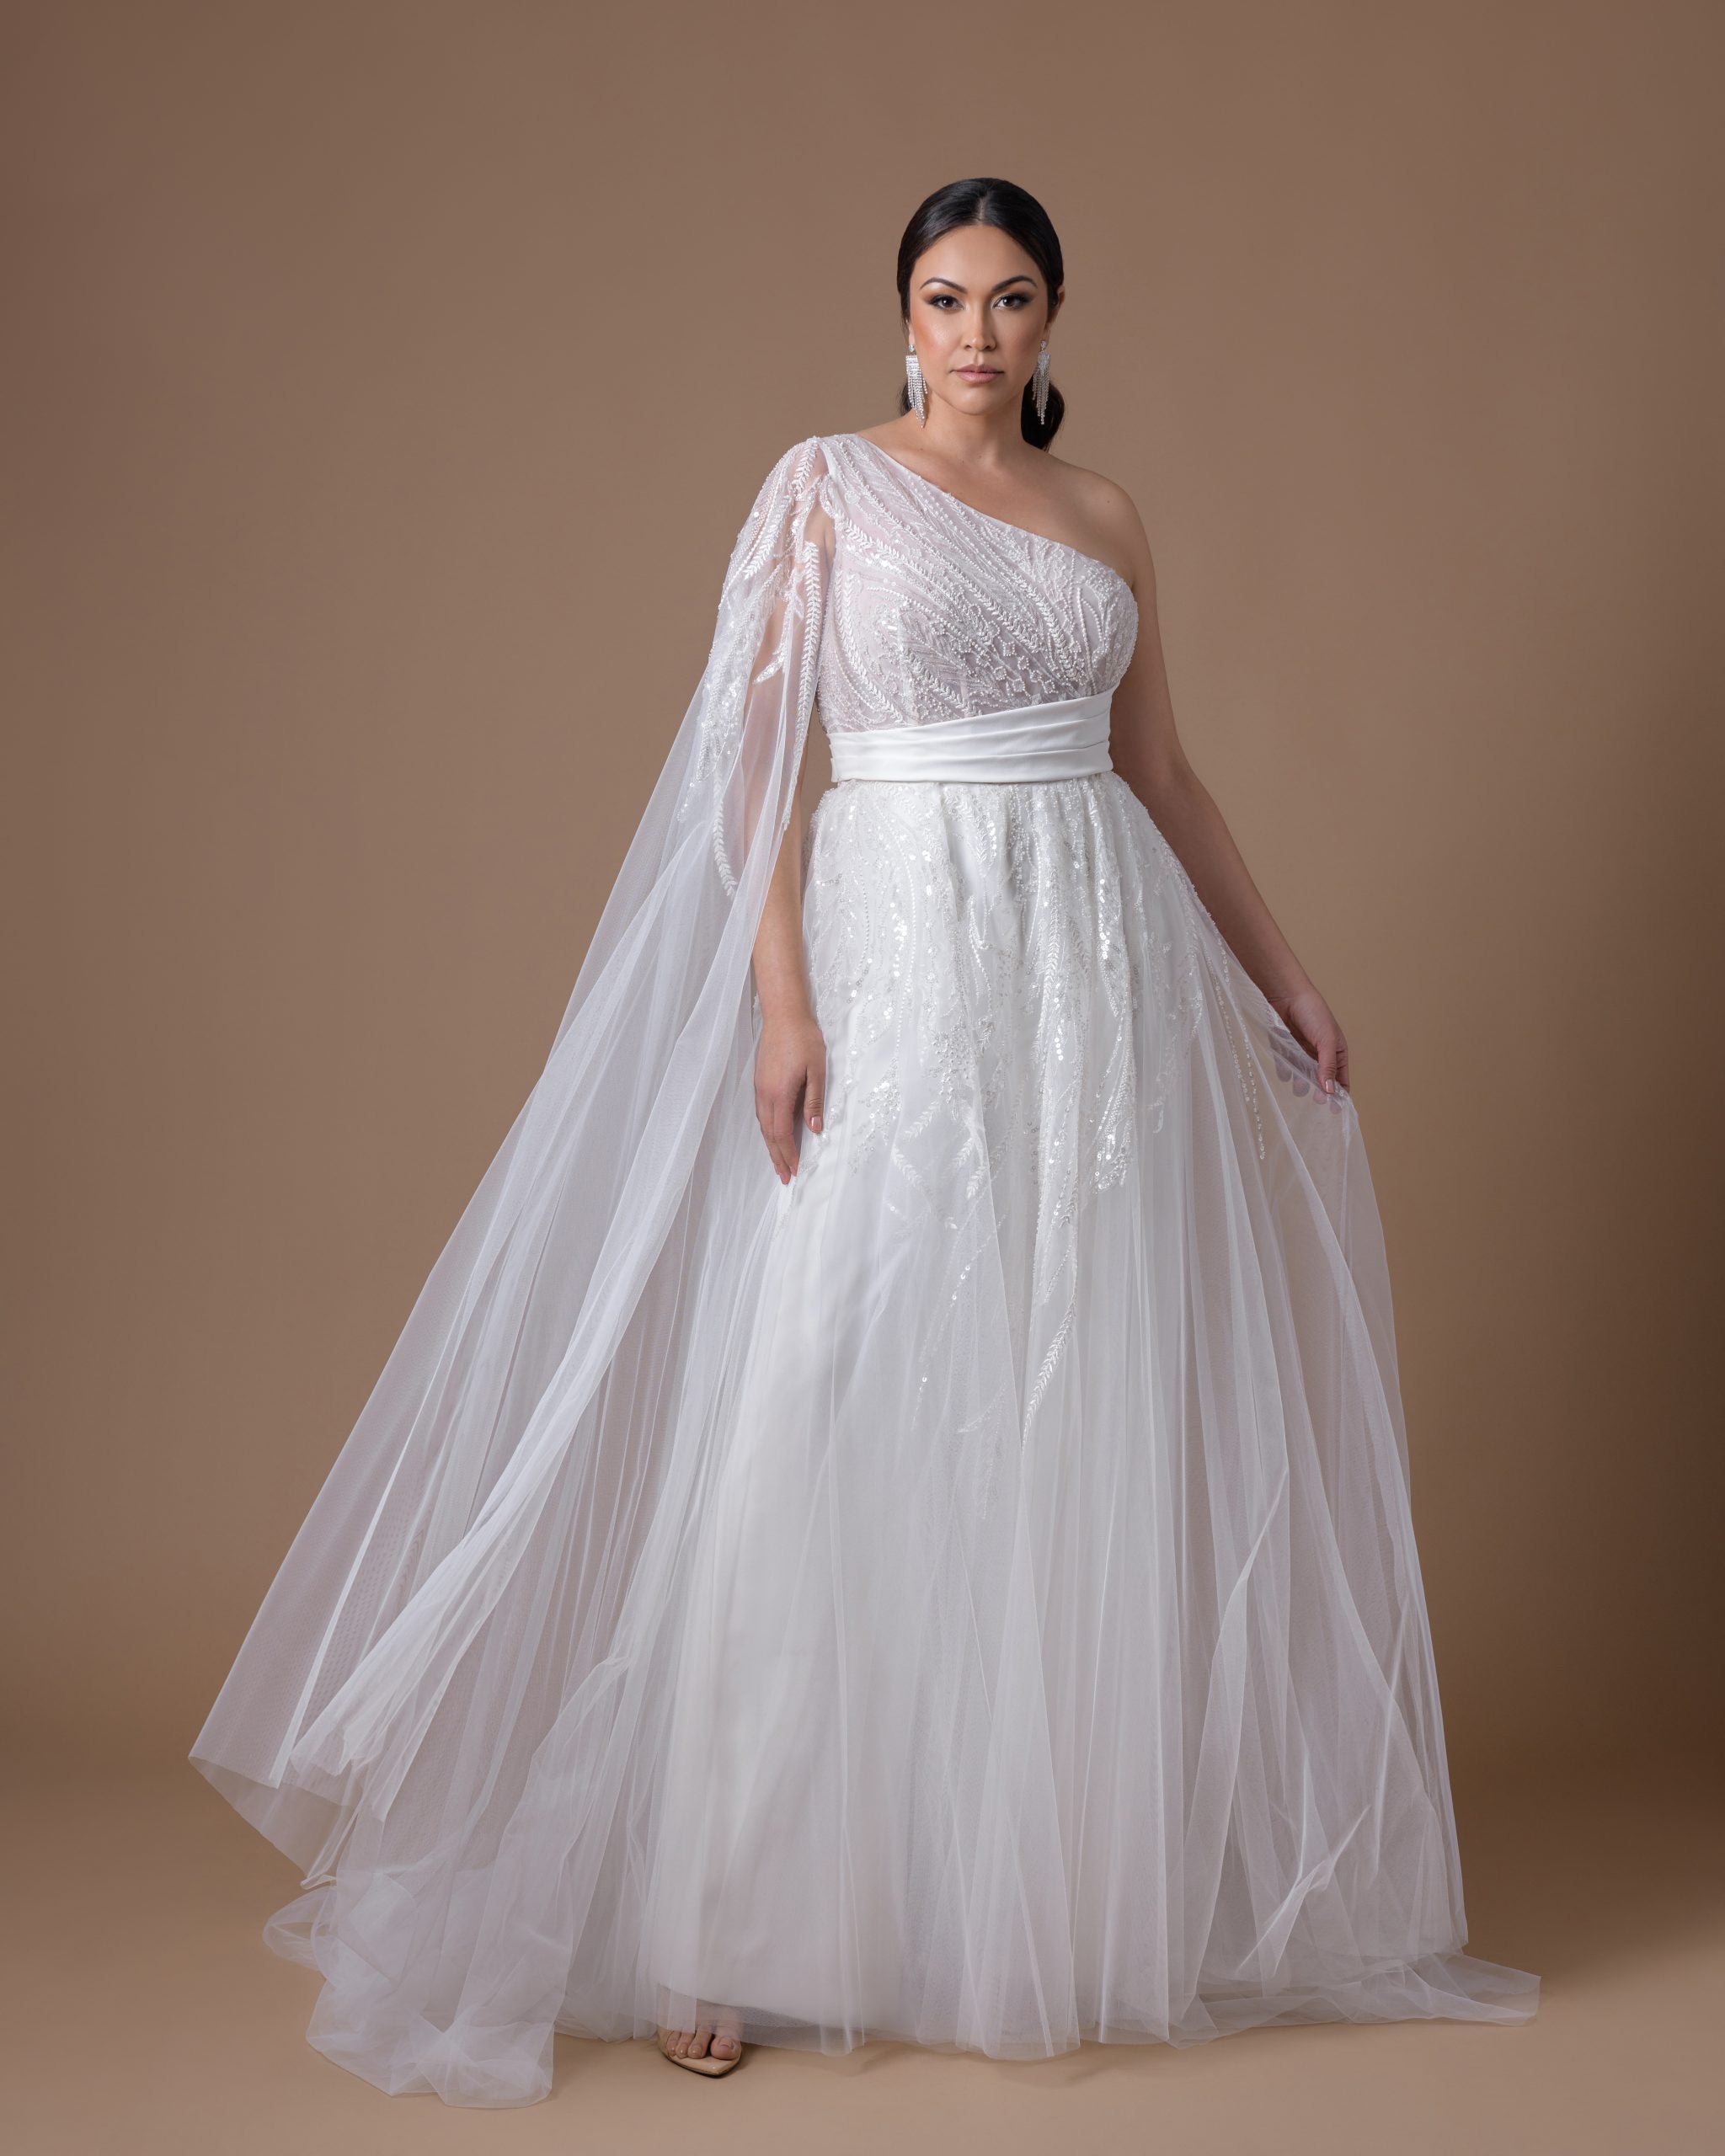 One Shoulder A-line Tulle Wedding Dress by Dany Girl - Image 1